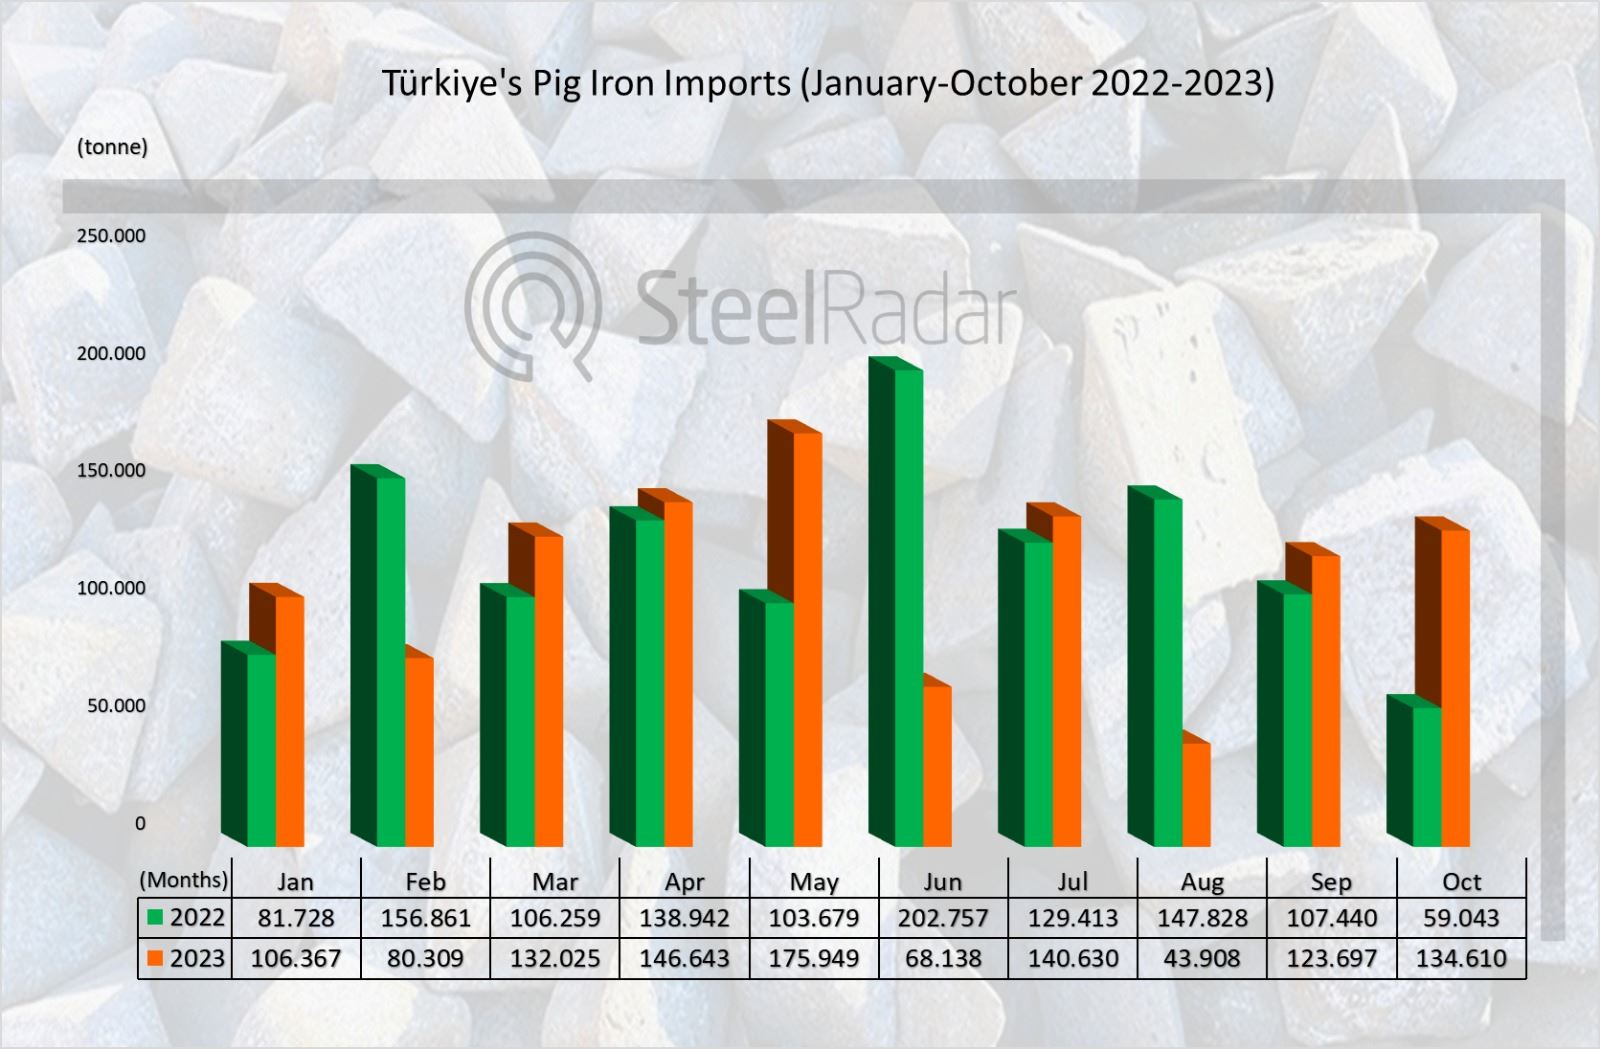 Turkey's pig iron imports increased by 127.99%